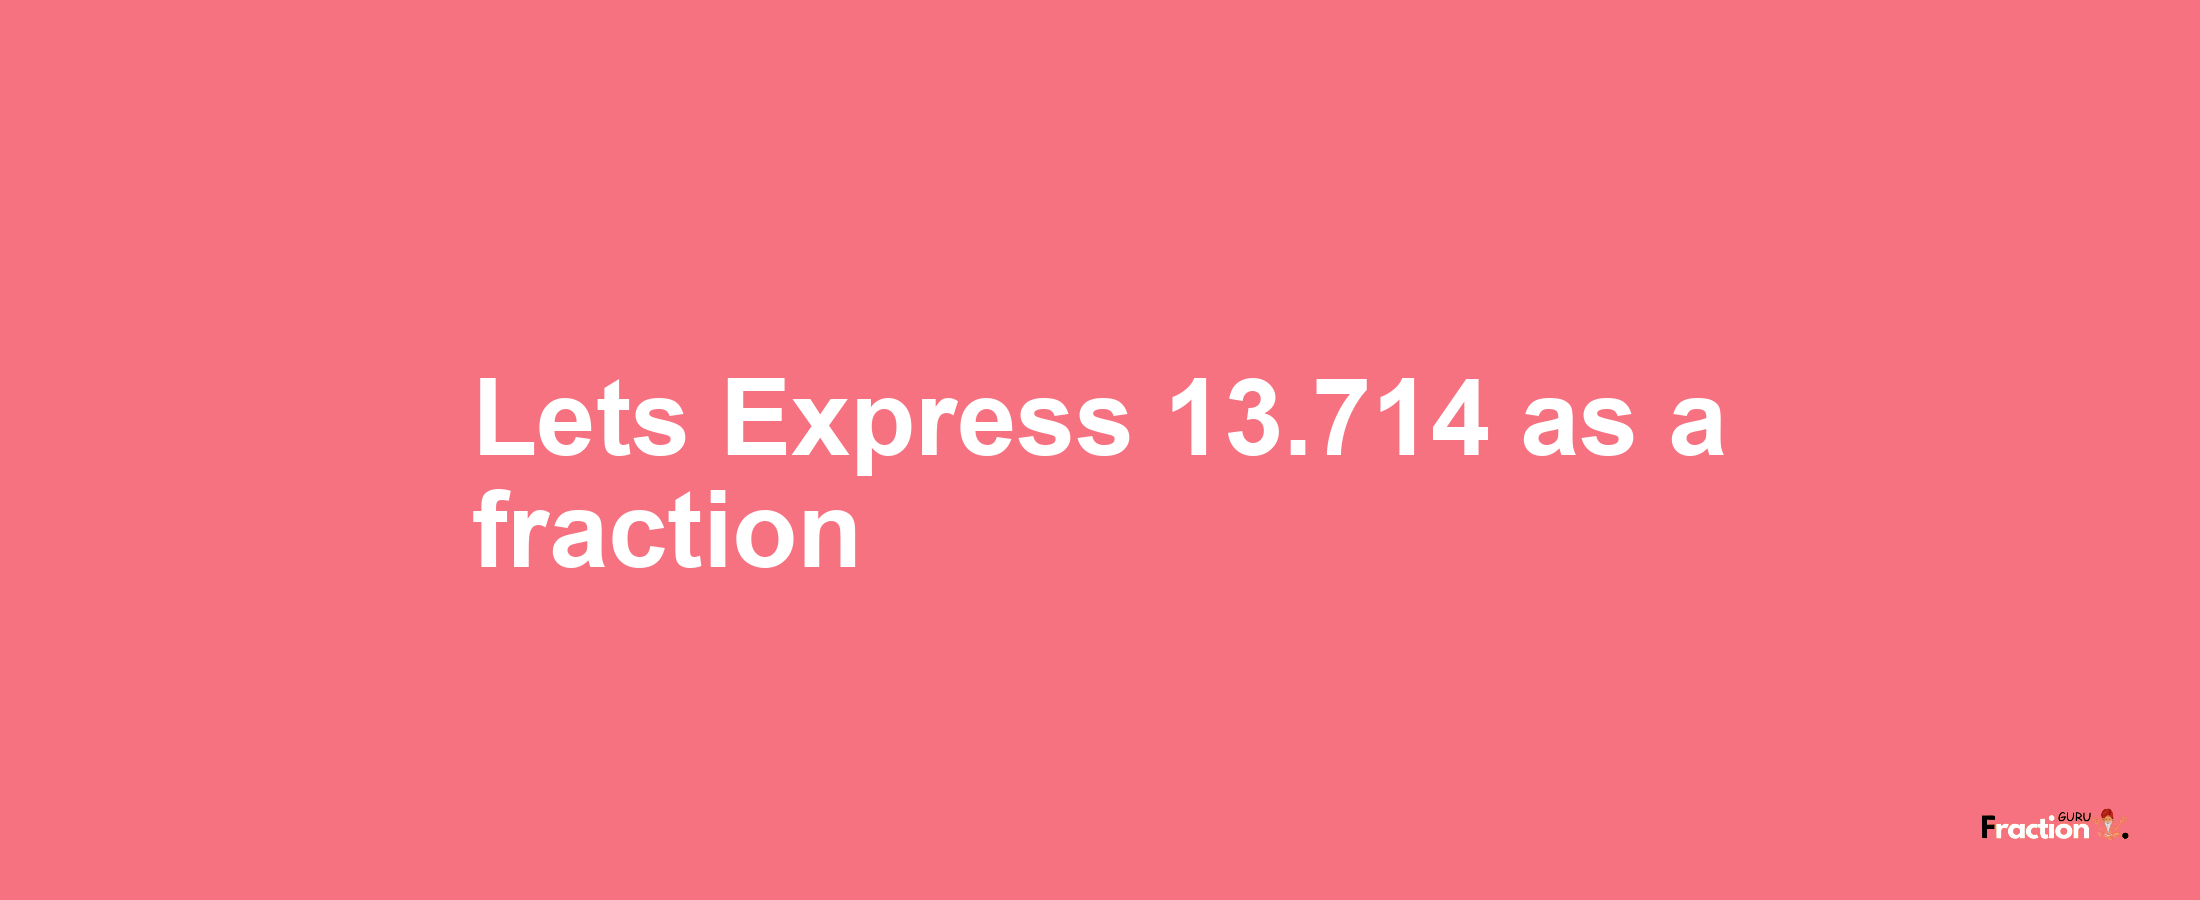 Lets Express 13.714 as afraction